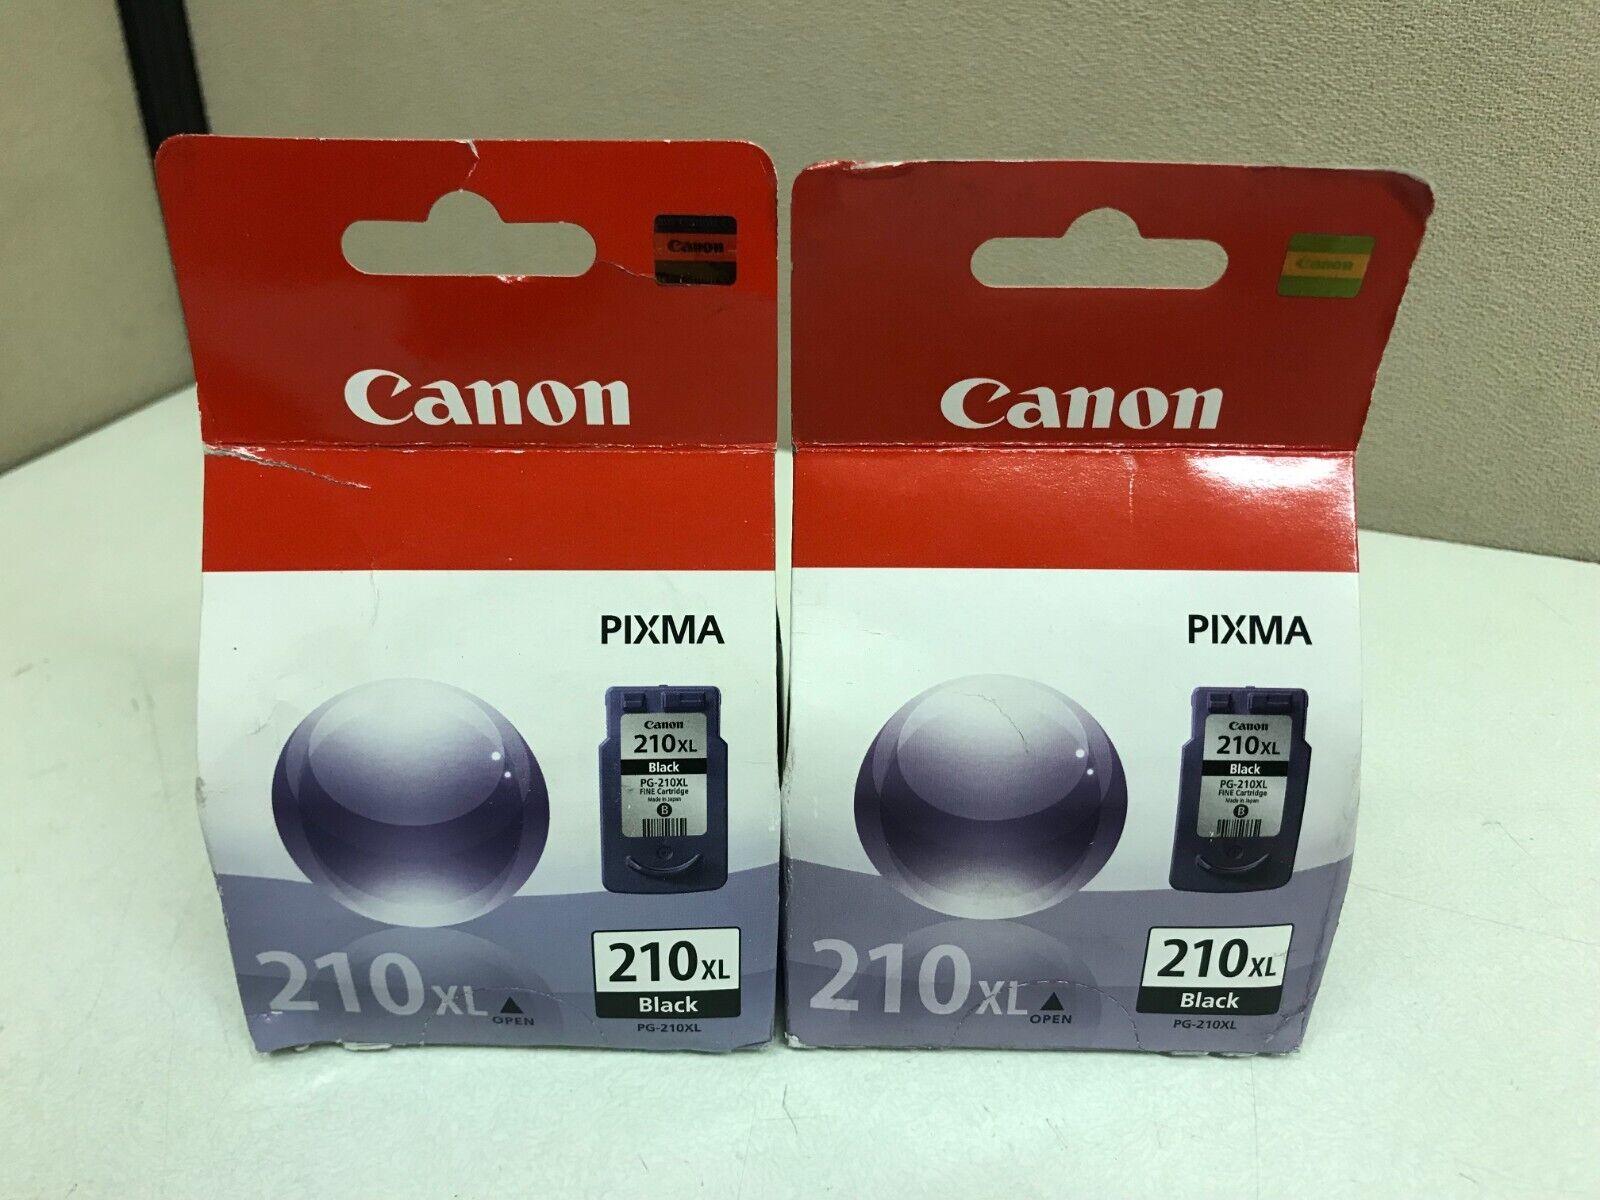 LOT of 2 Sealed Genuine Canon 210XL Black Ink Cartridge PG-210XL